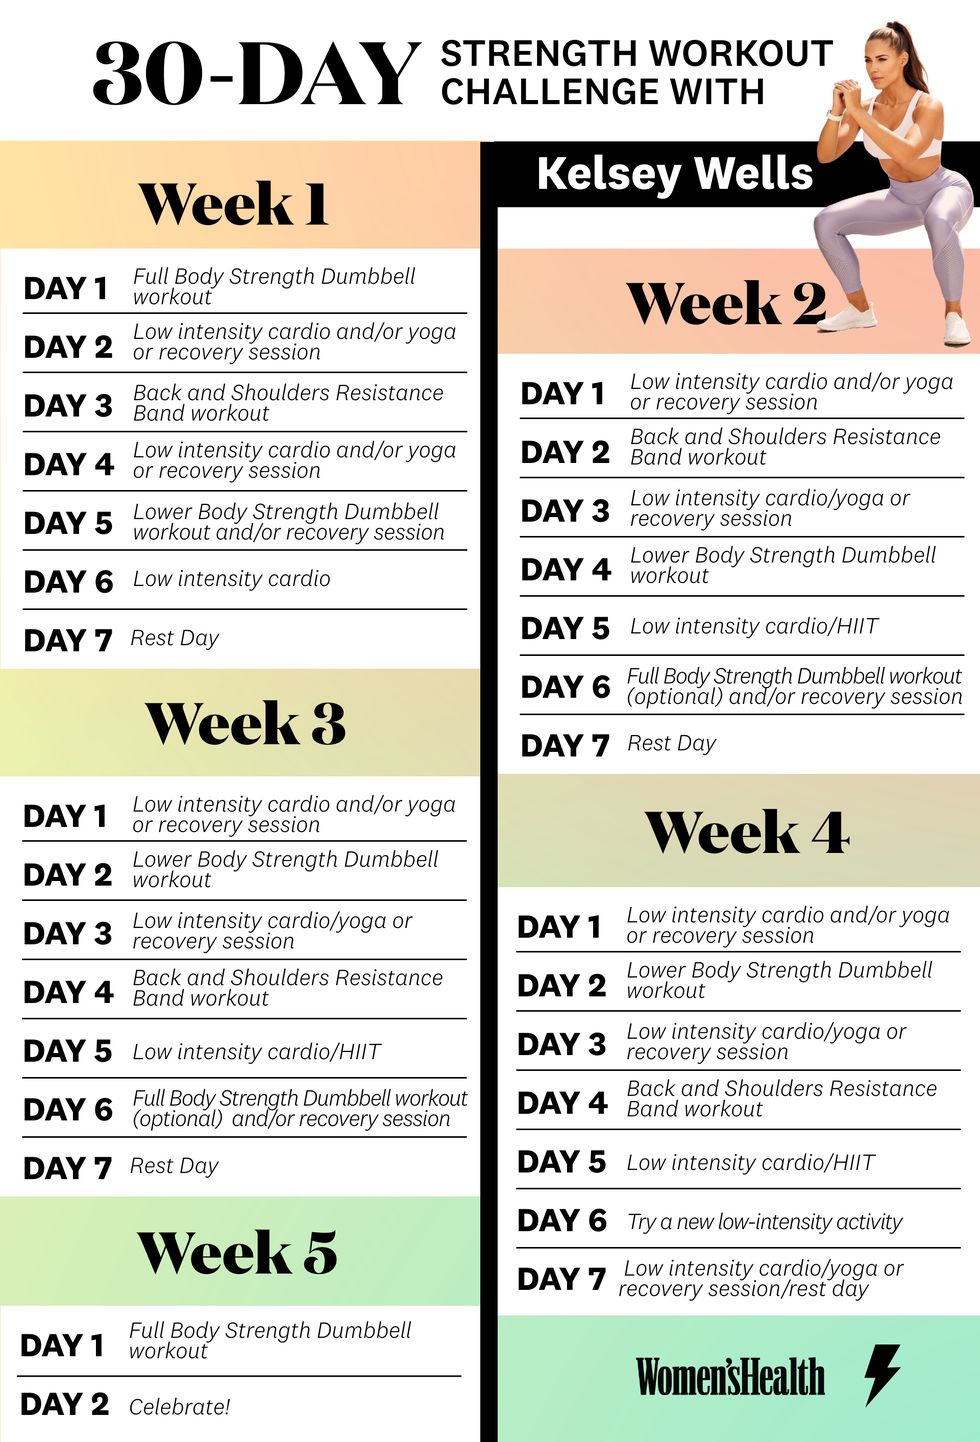 Slow Your Pace: A Free 30-Day Challenge